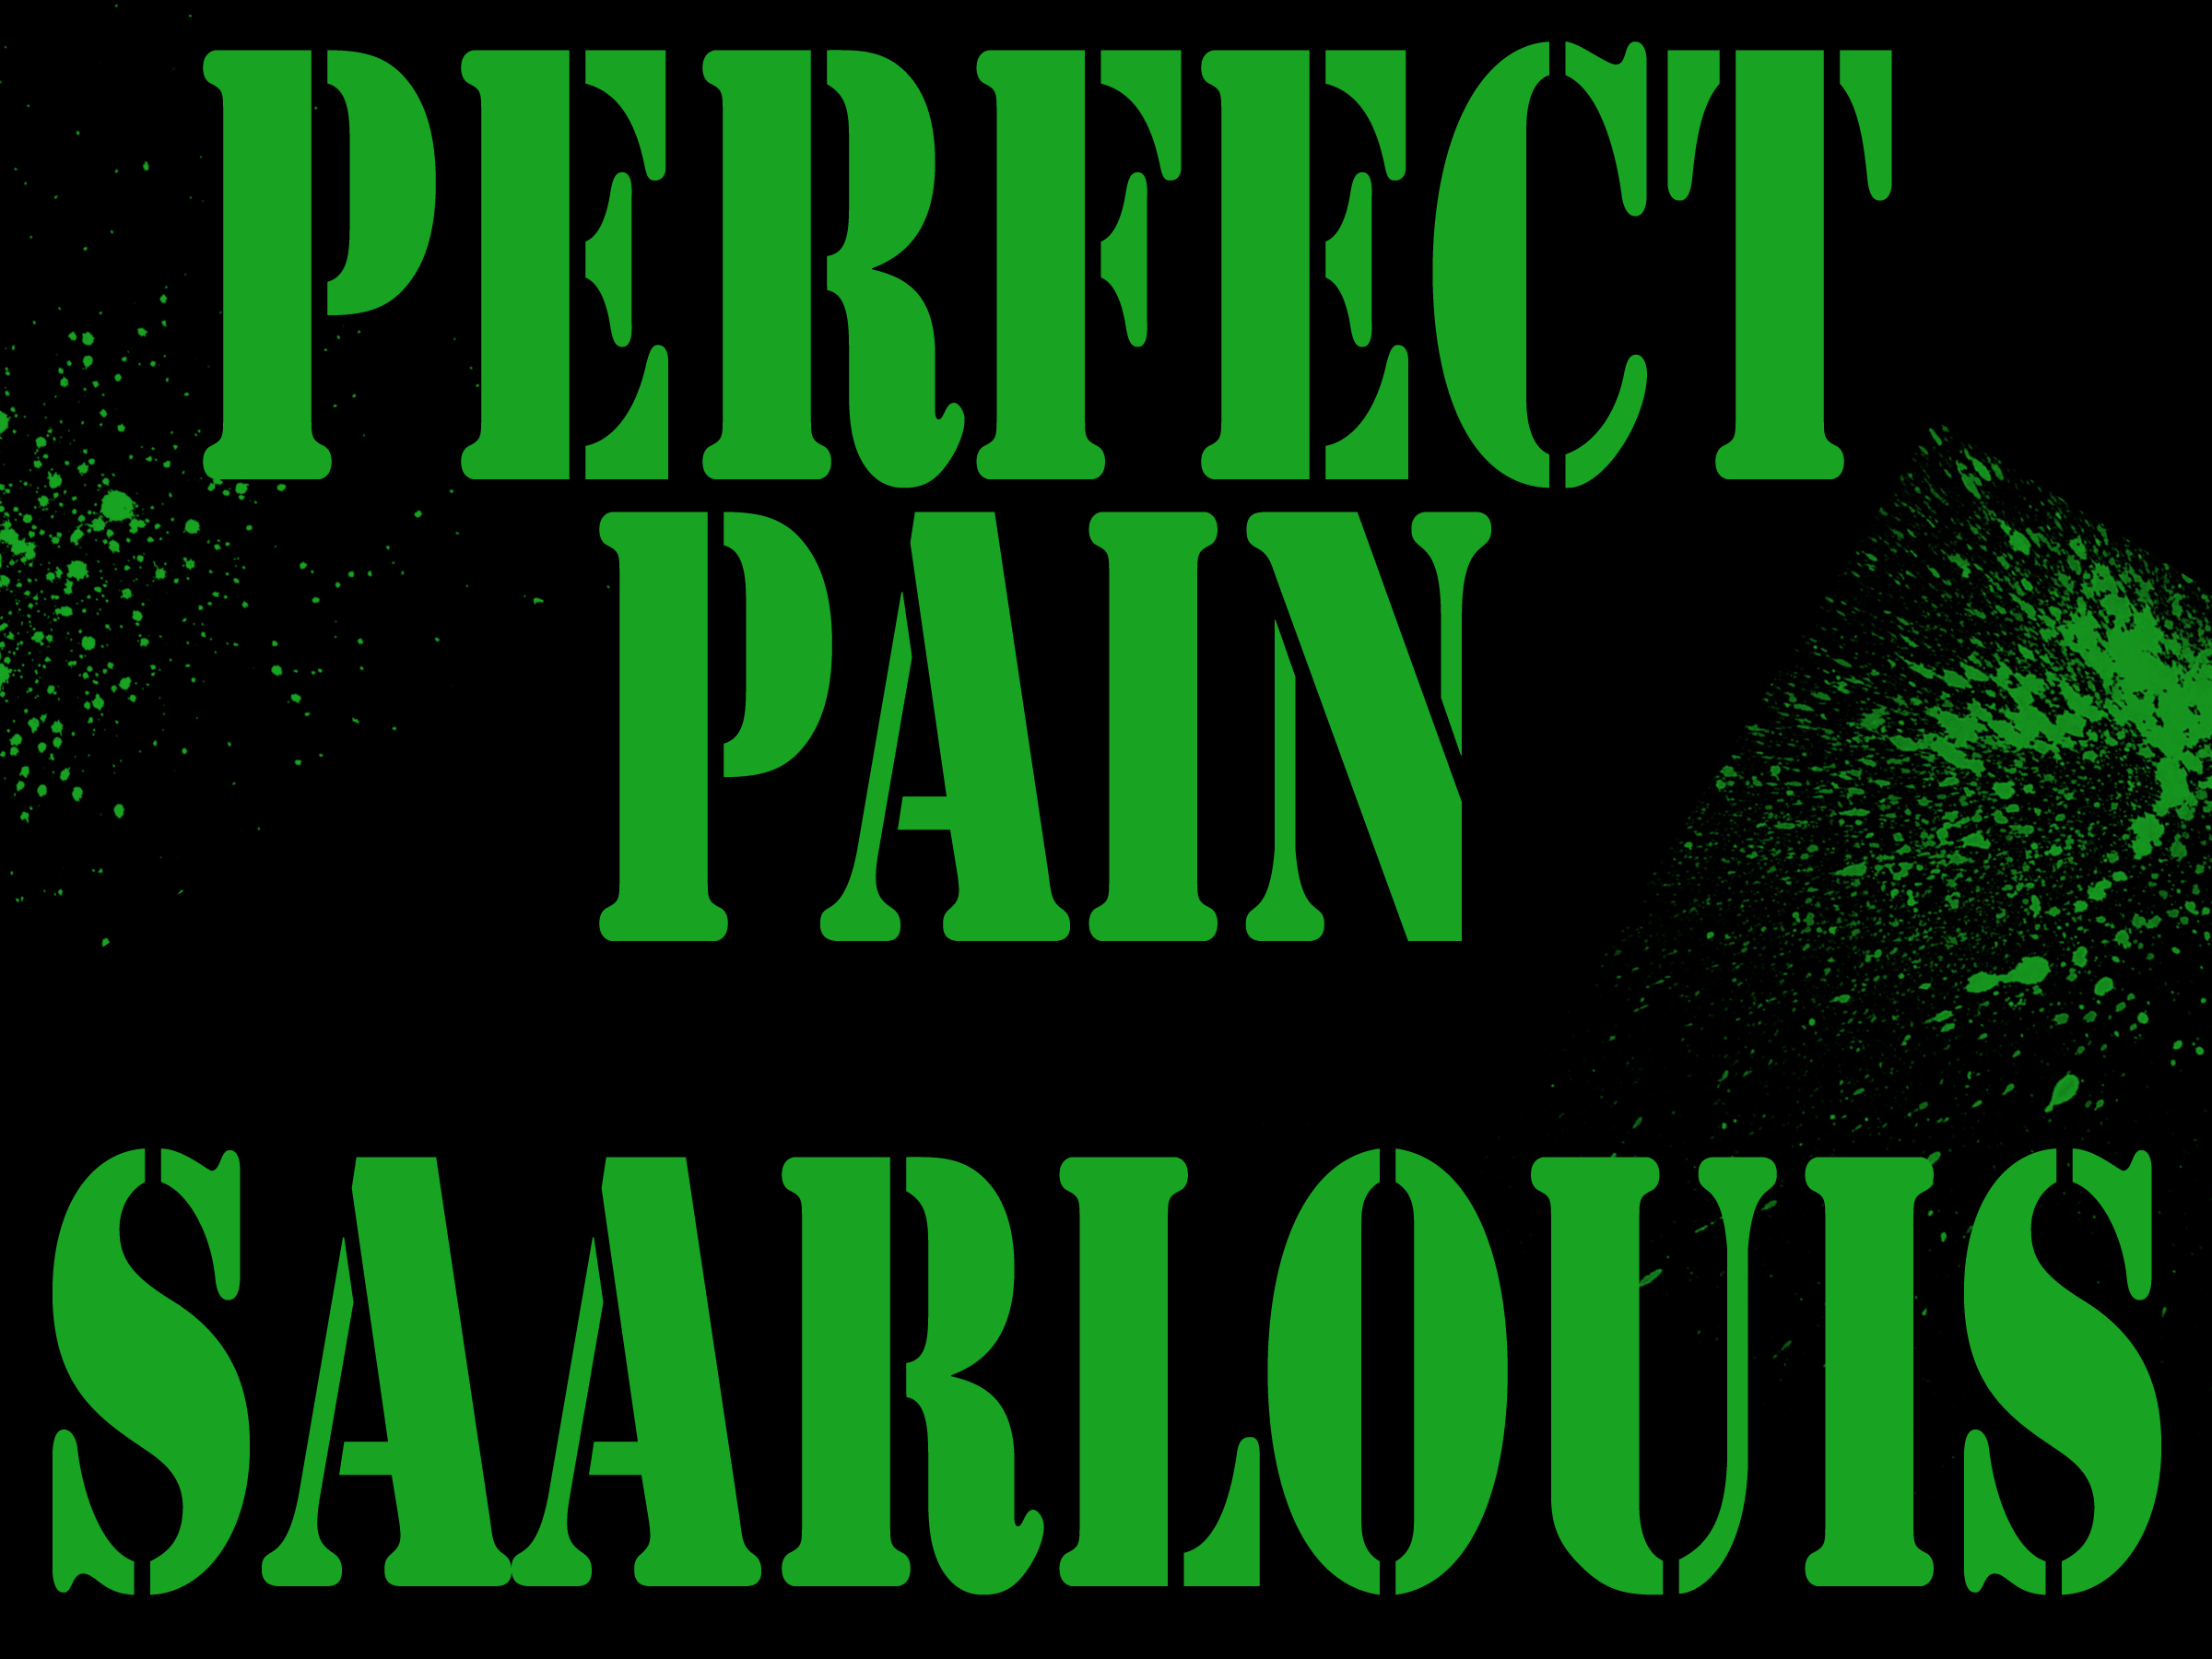 Perfect Pain